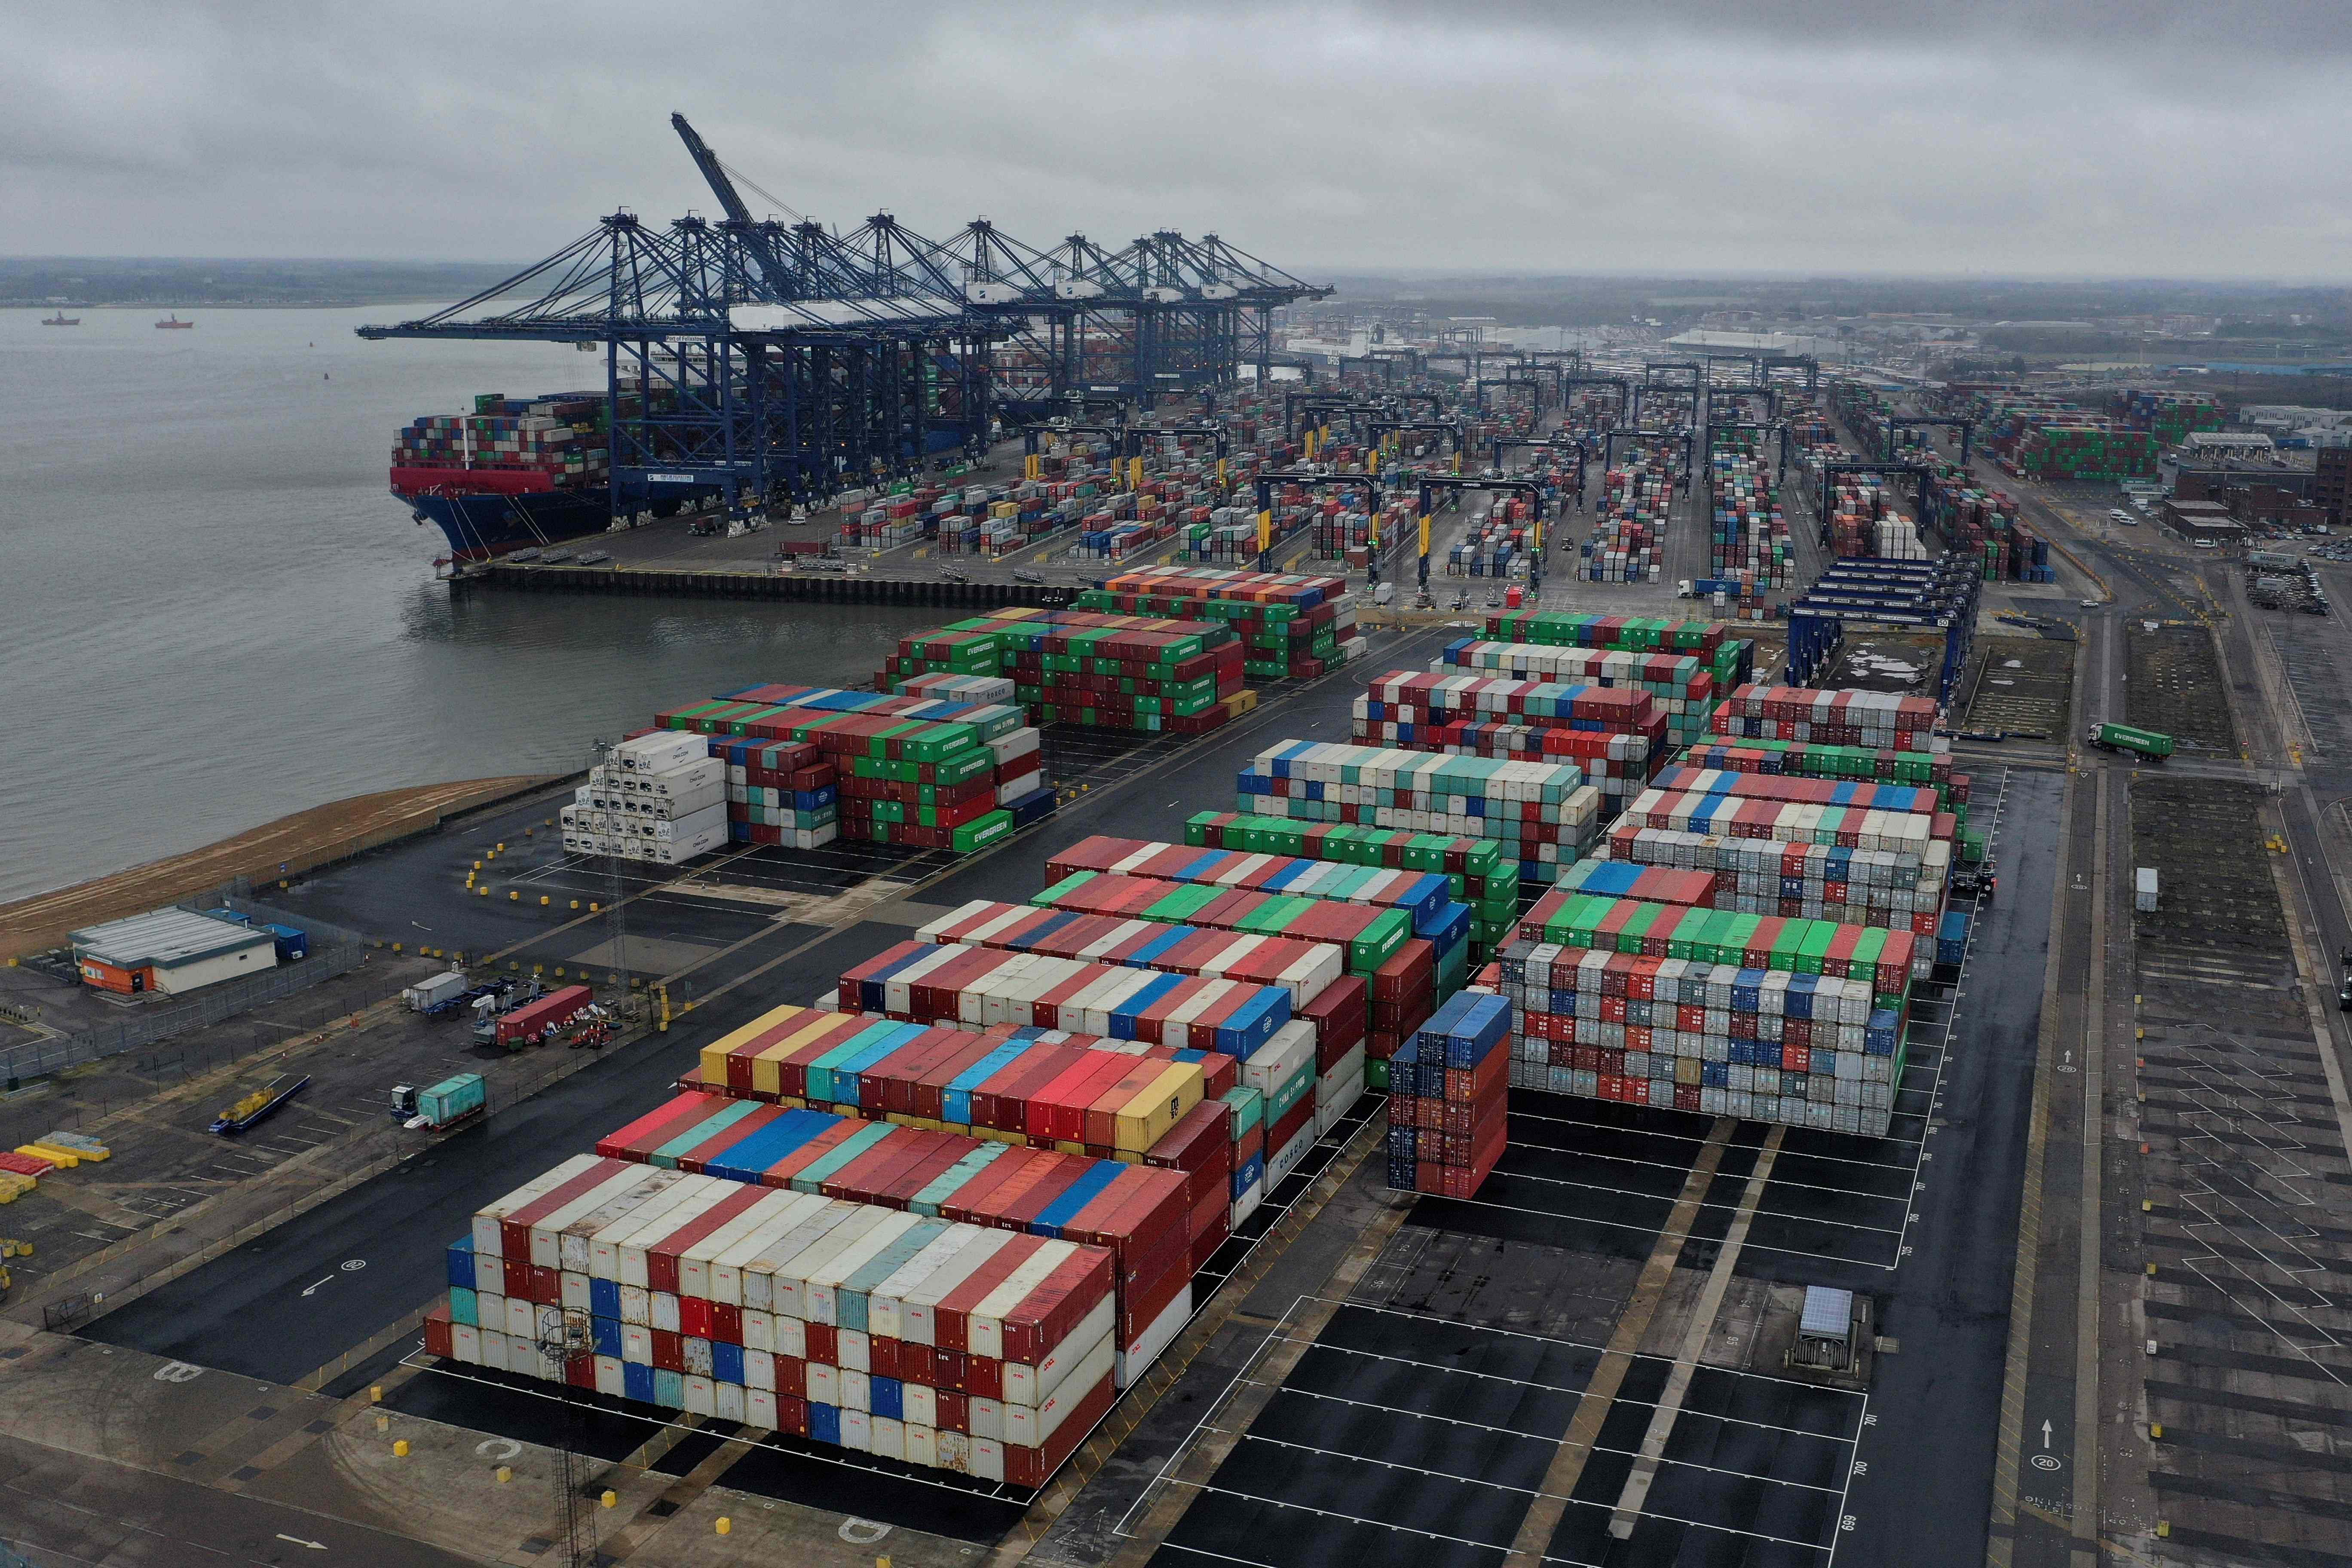 World’s largest shipping container company Maersk diverts big cargo ships away from the UK as Felixstowe port fills up due to HGV container backlog